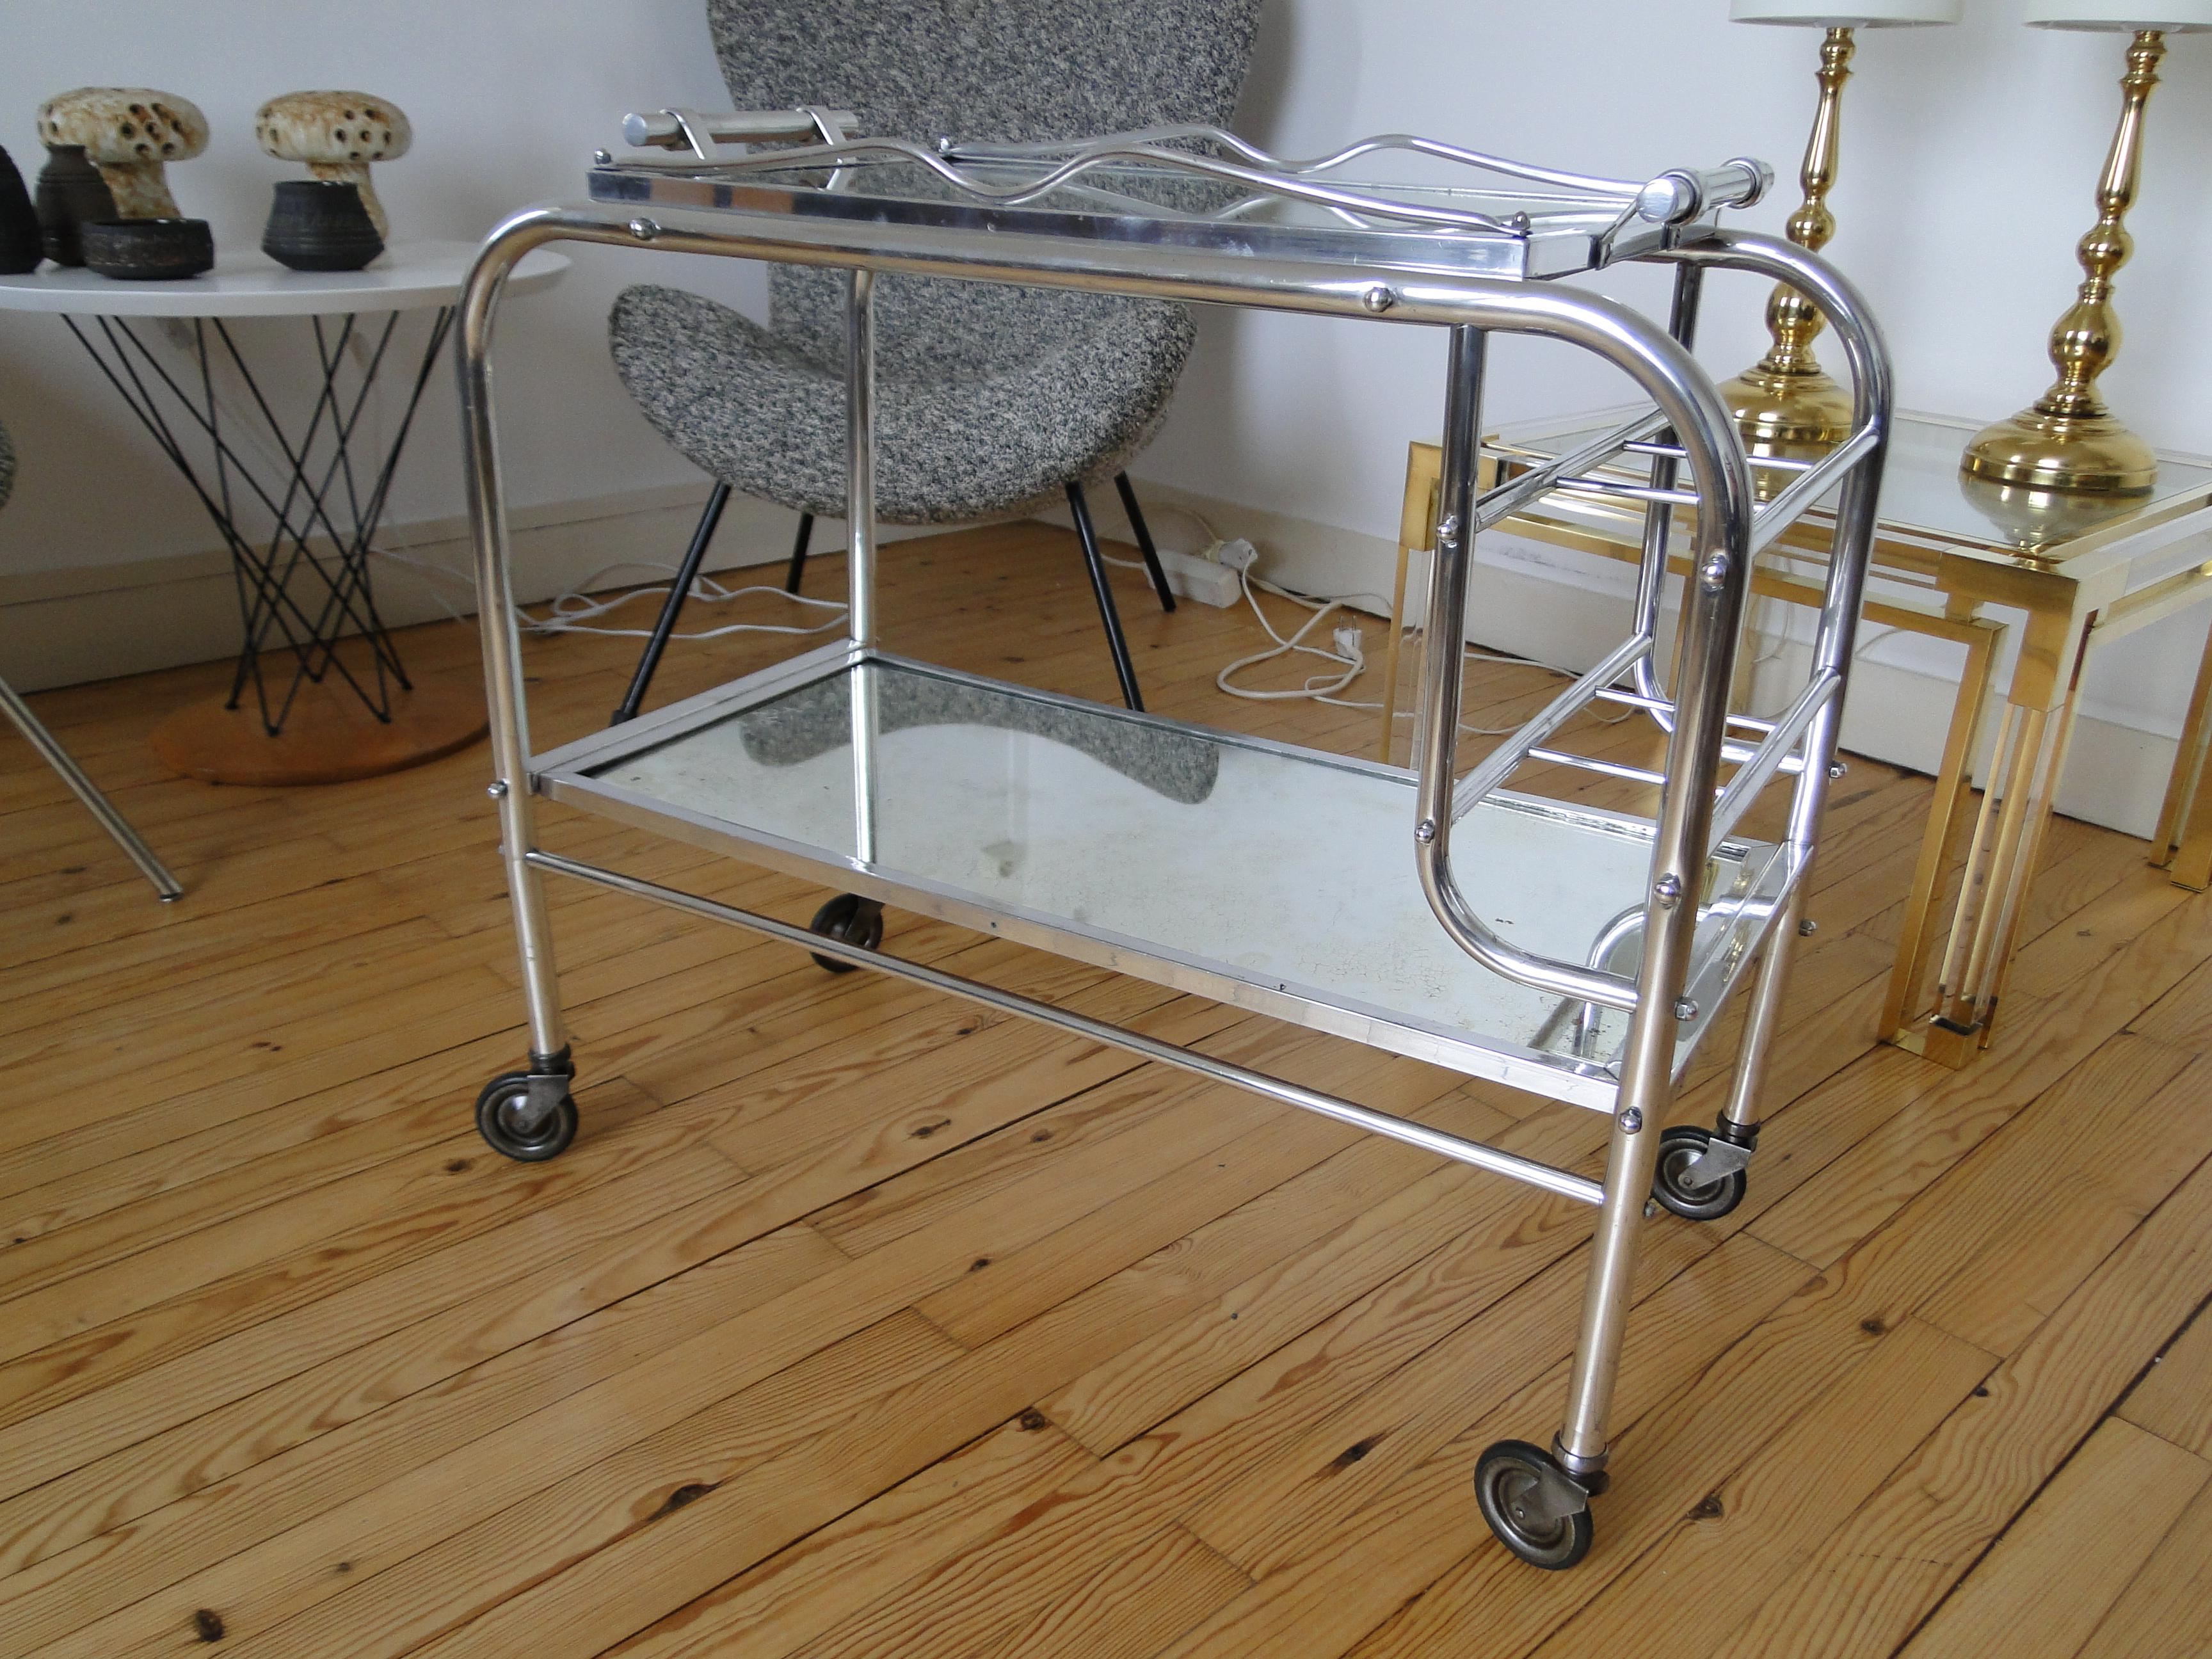 This magnificent Jacques Adnet bar cart comes from a Chateau in the Medoc 

near Bordeaux in the South West of France where it has been since the 1950s



It has been dismantled and completely cleaned
the wheels work perfectly and do not make